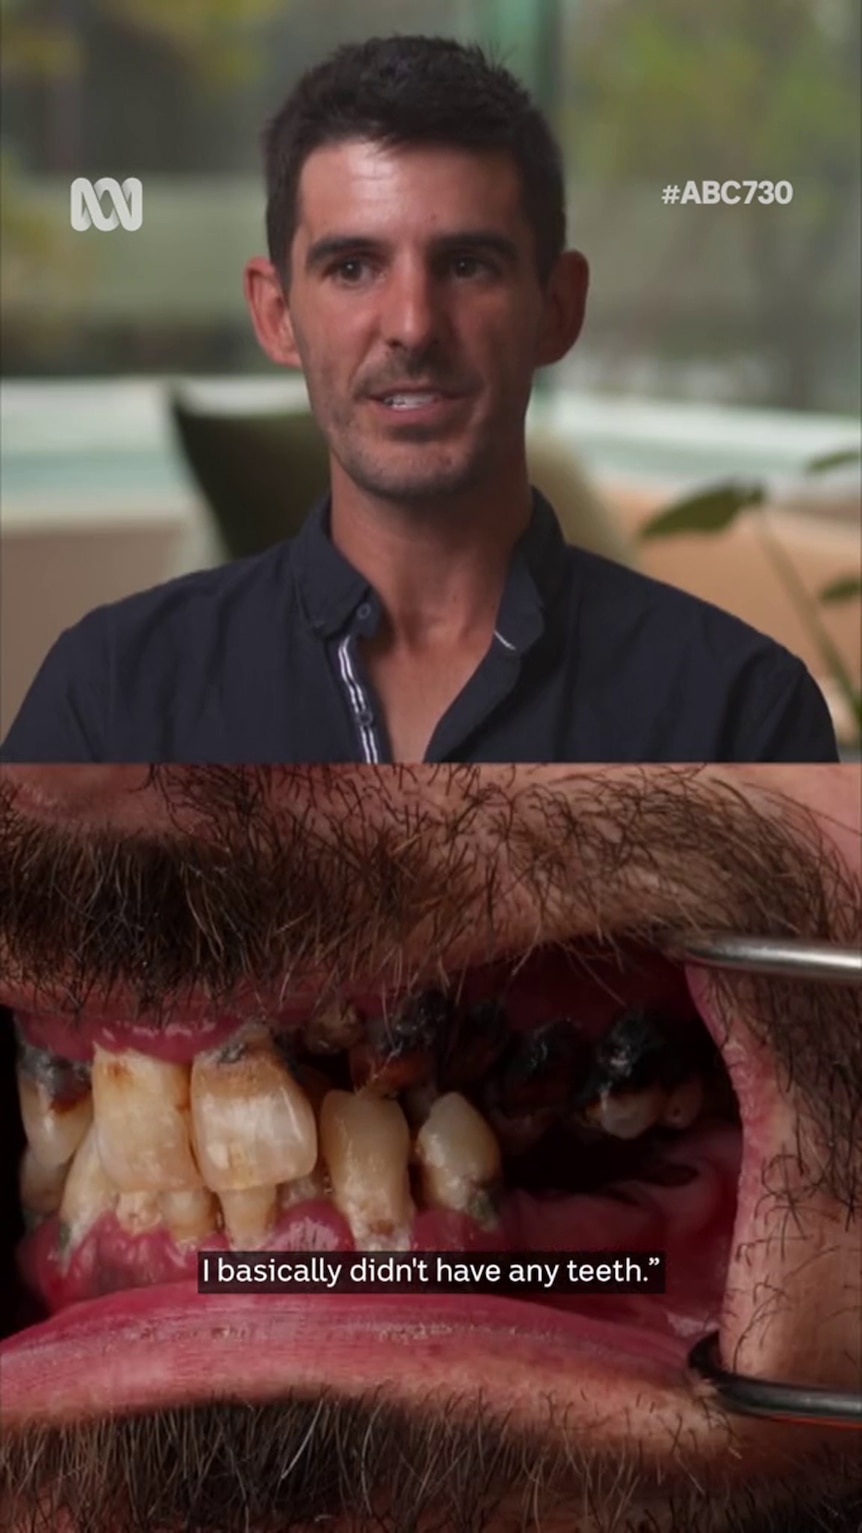 Composite shows photo of man with light skin tone and straight teeth, and a shot of teeth in poor condition